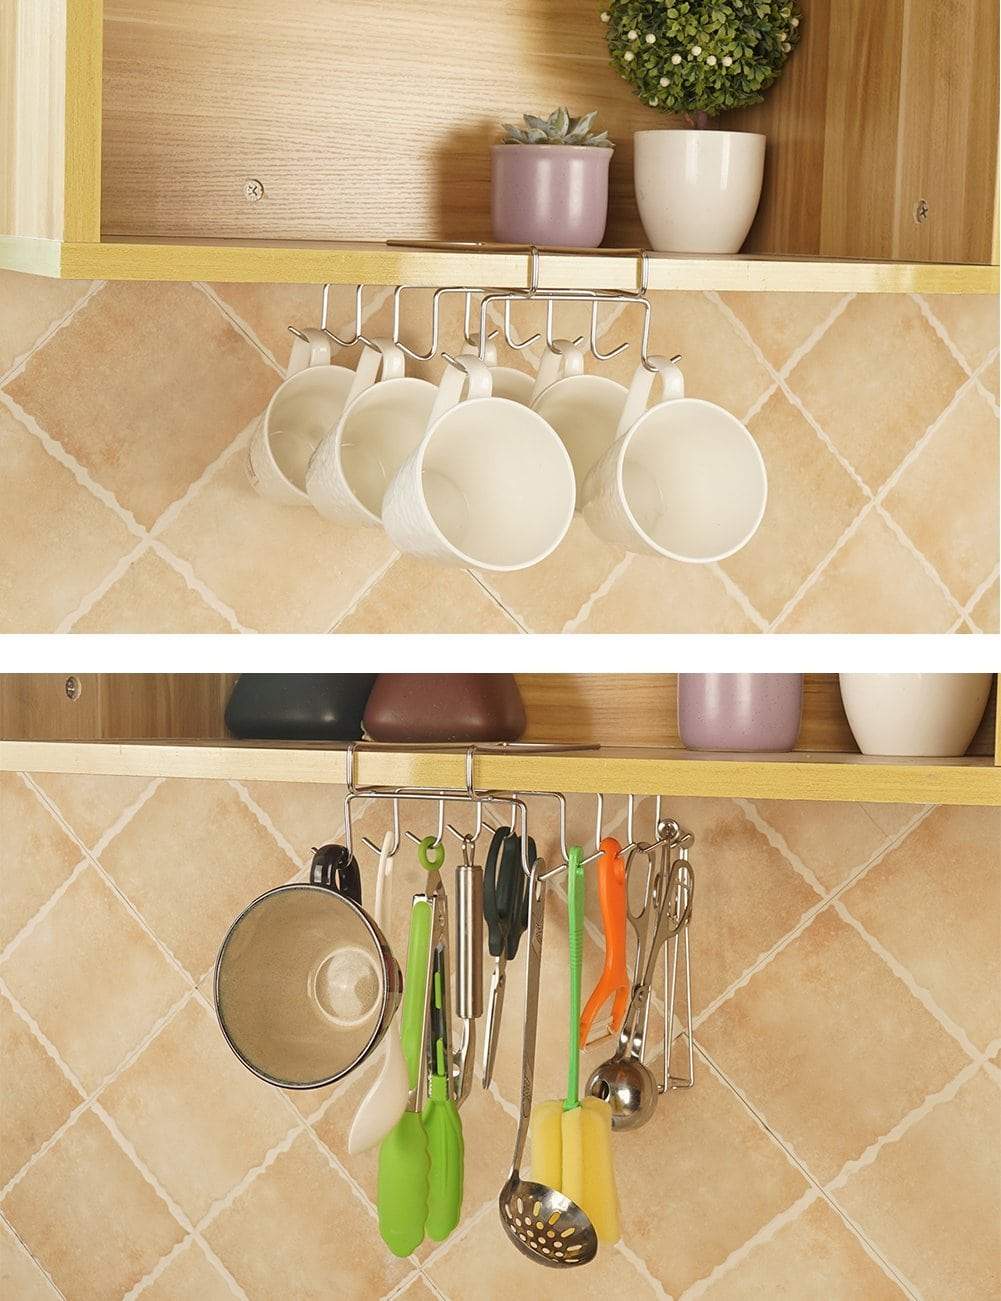 XILAOTOU Mug Rack Under Cabinet - Coffee Cup Holder, Each Bracket is  Equipped with 6 and Adjustable